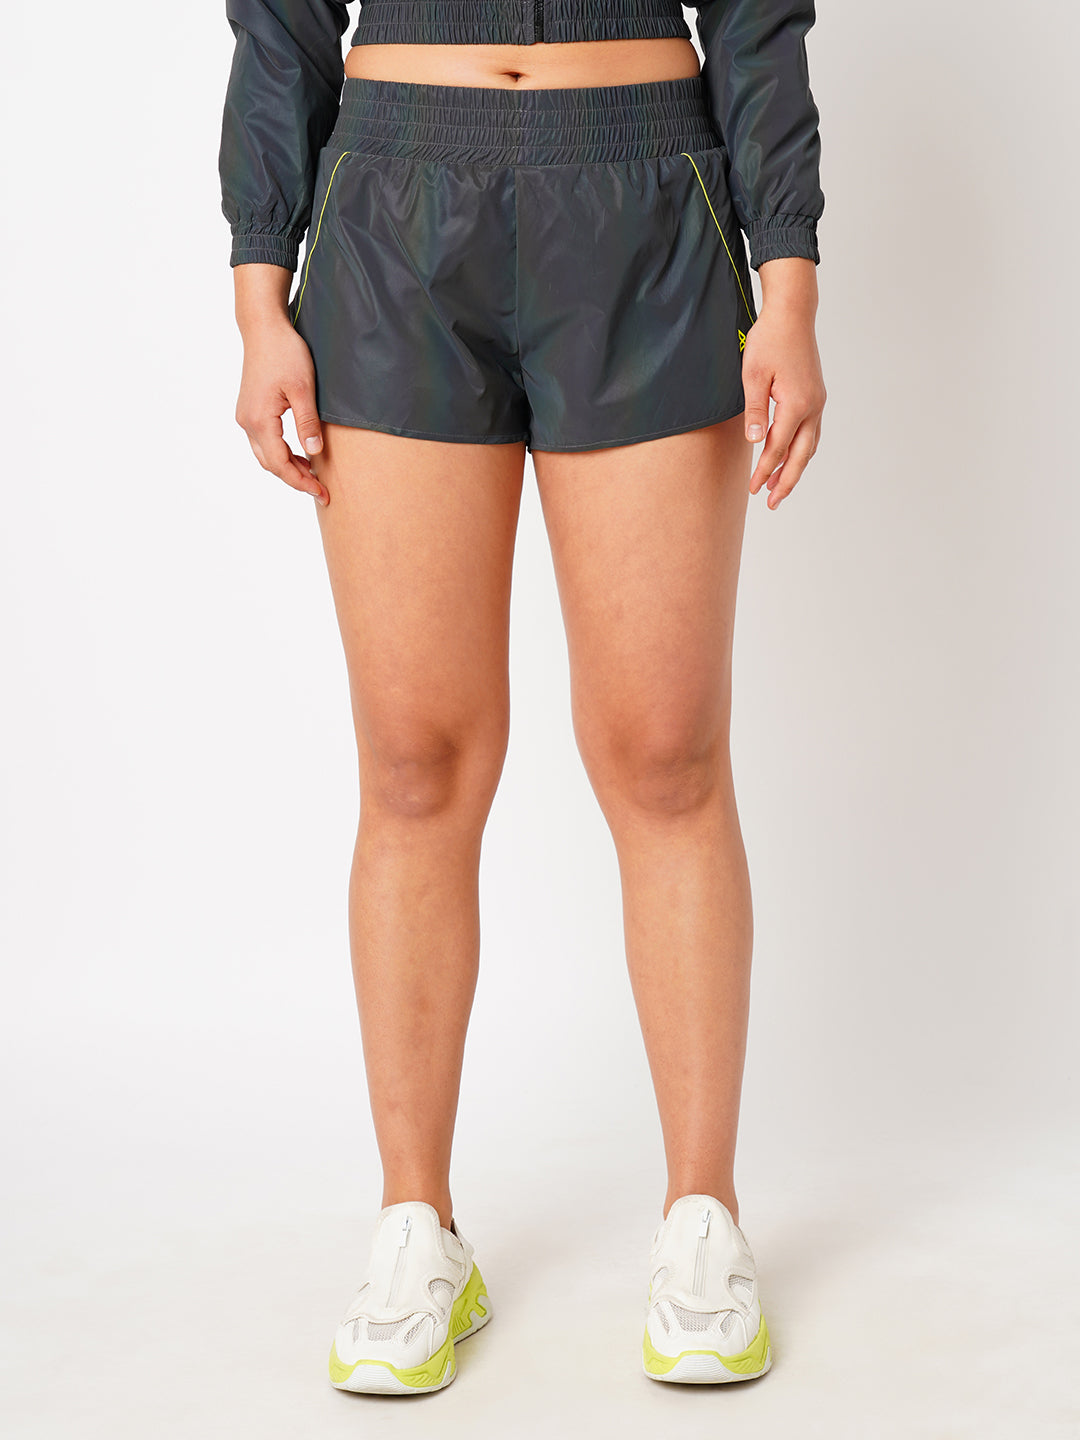 Greatest Obsession Reflective Shorts BODD ACTIVE